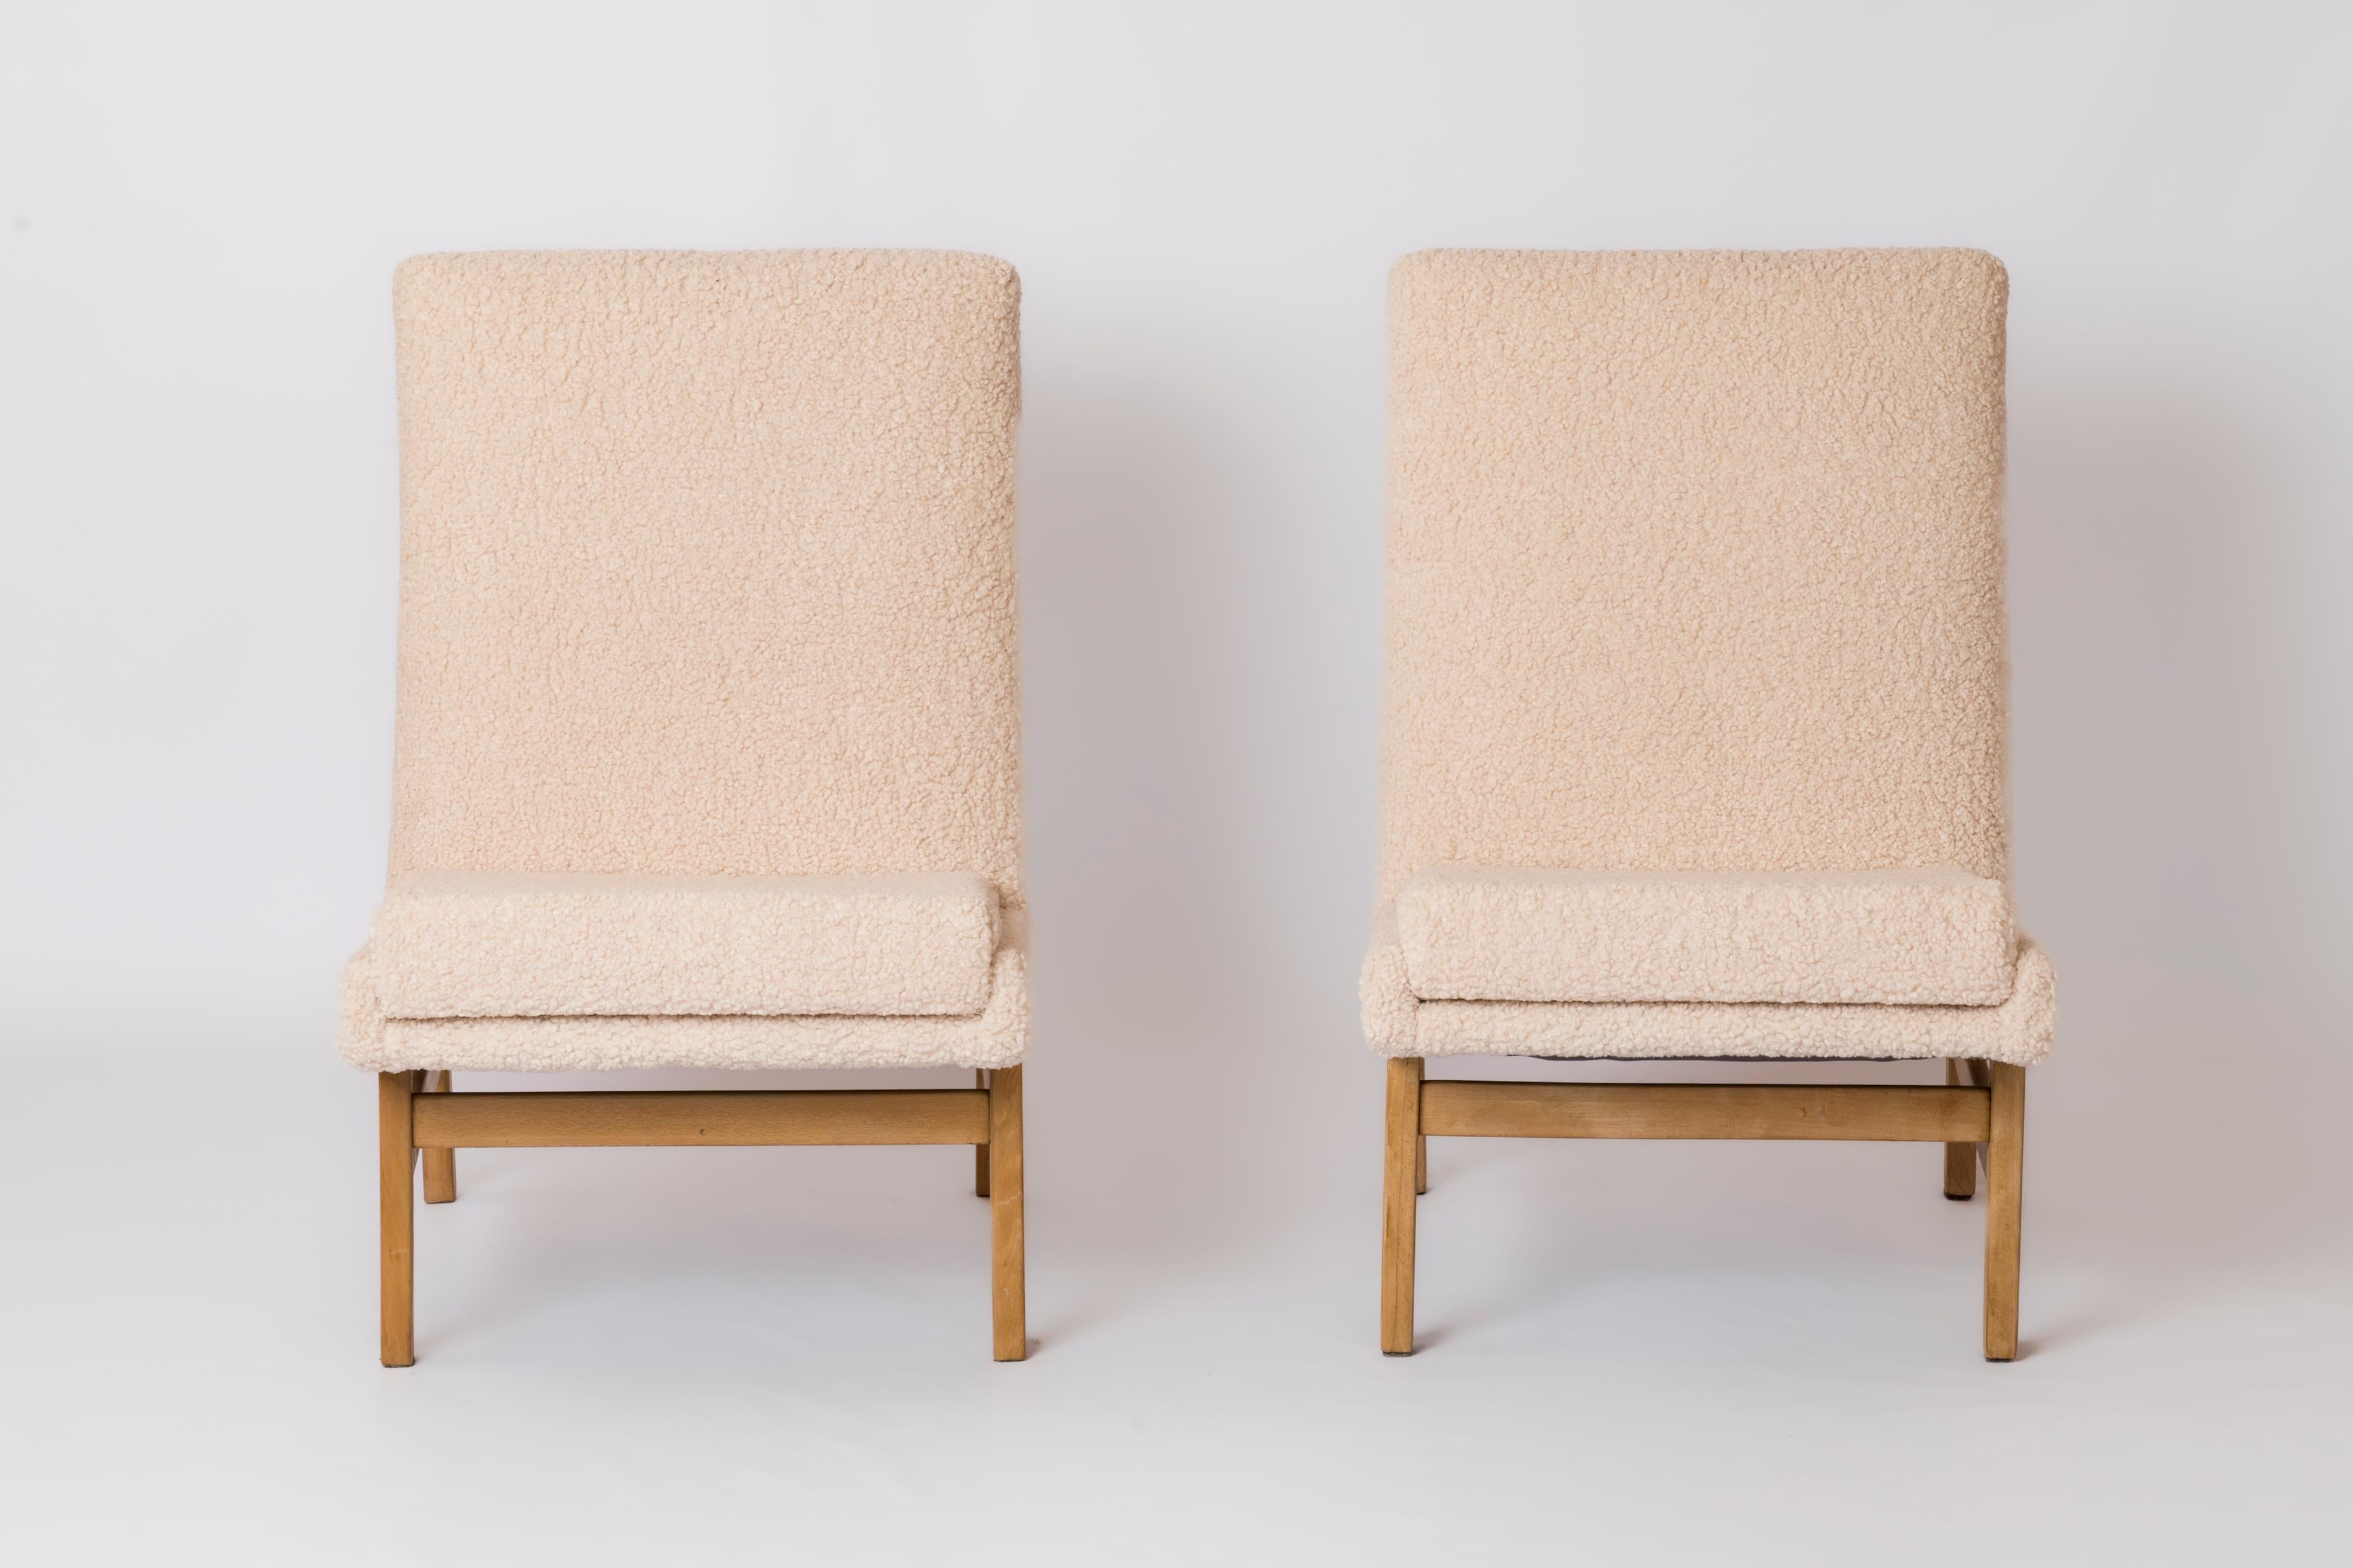 Mid-Century Modern Ash & Cream Boucle Chairs by Guariche, Mortier, Motte for ARP, France, 1955 For Sale